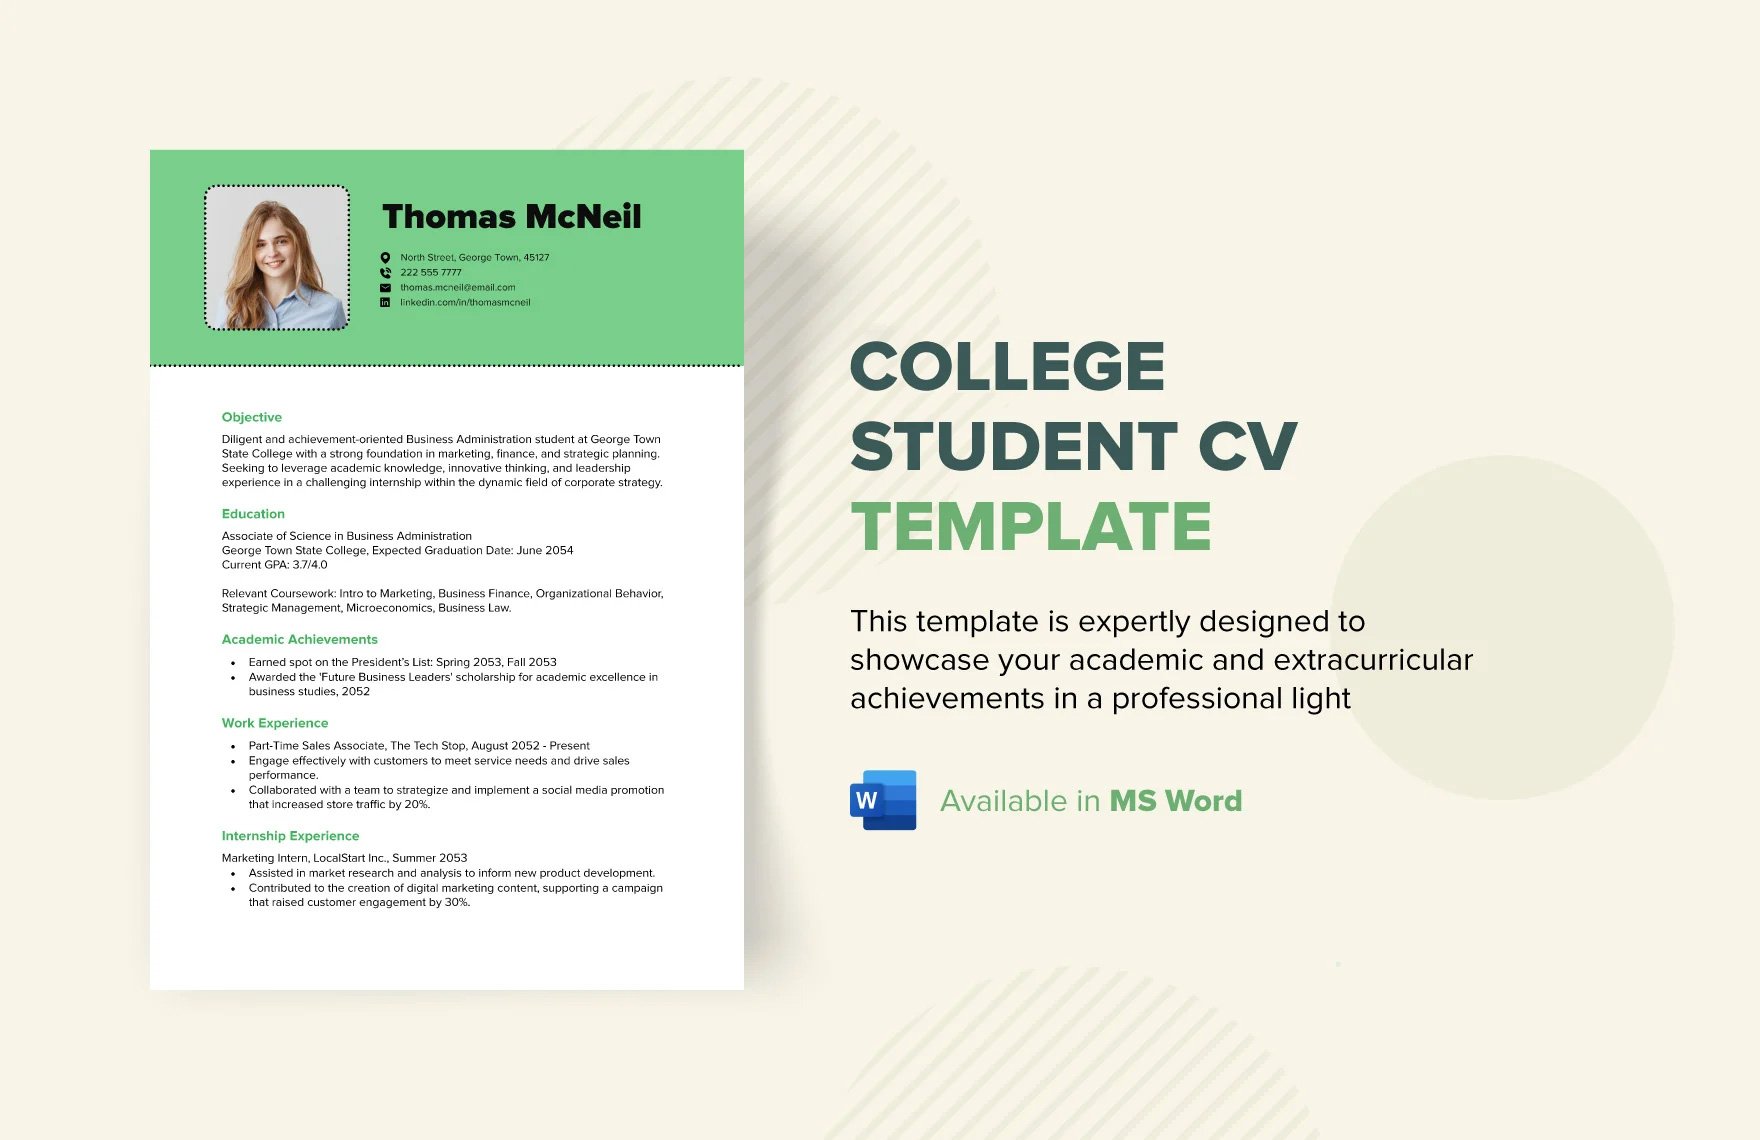 College Student CV Template in Word